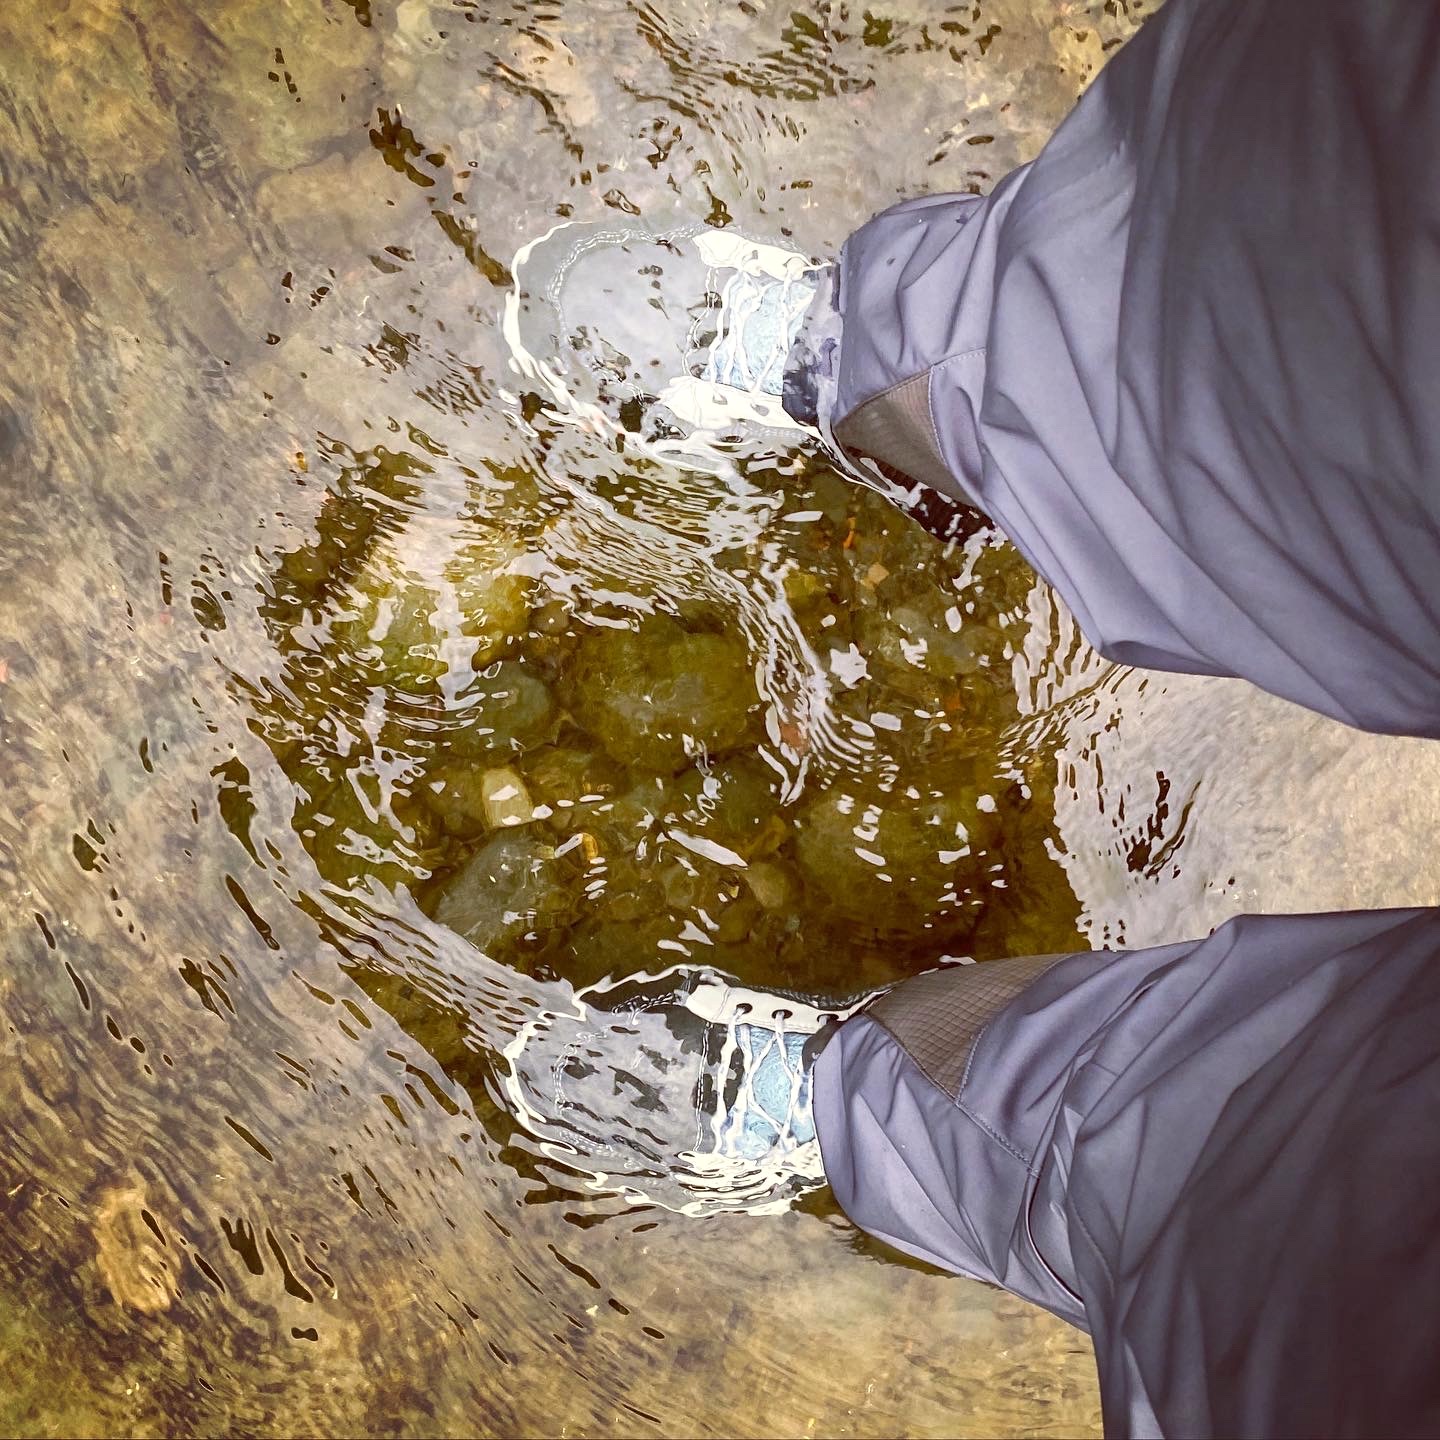 Wading boots in river water